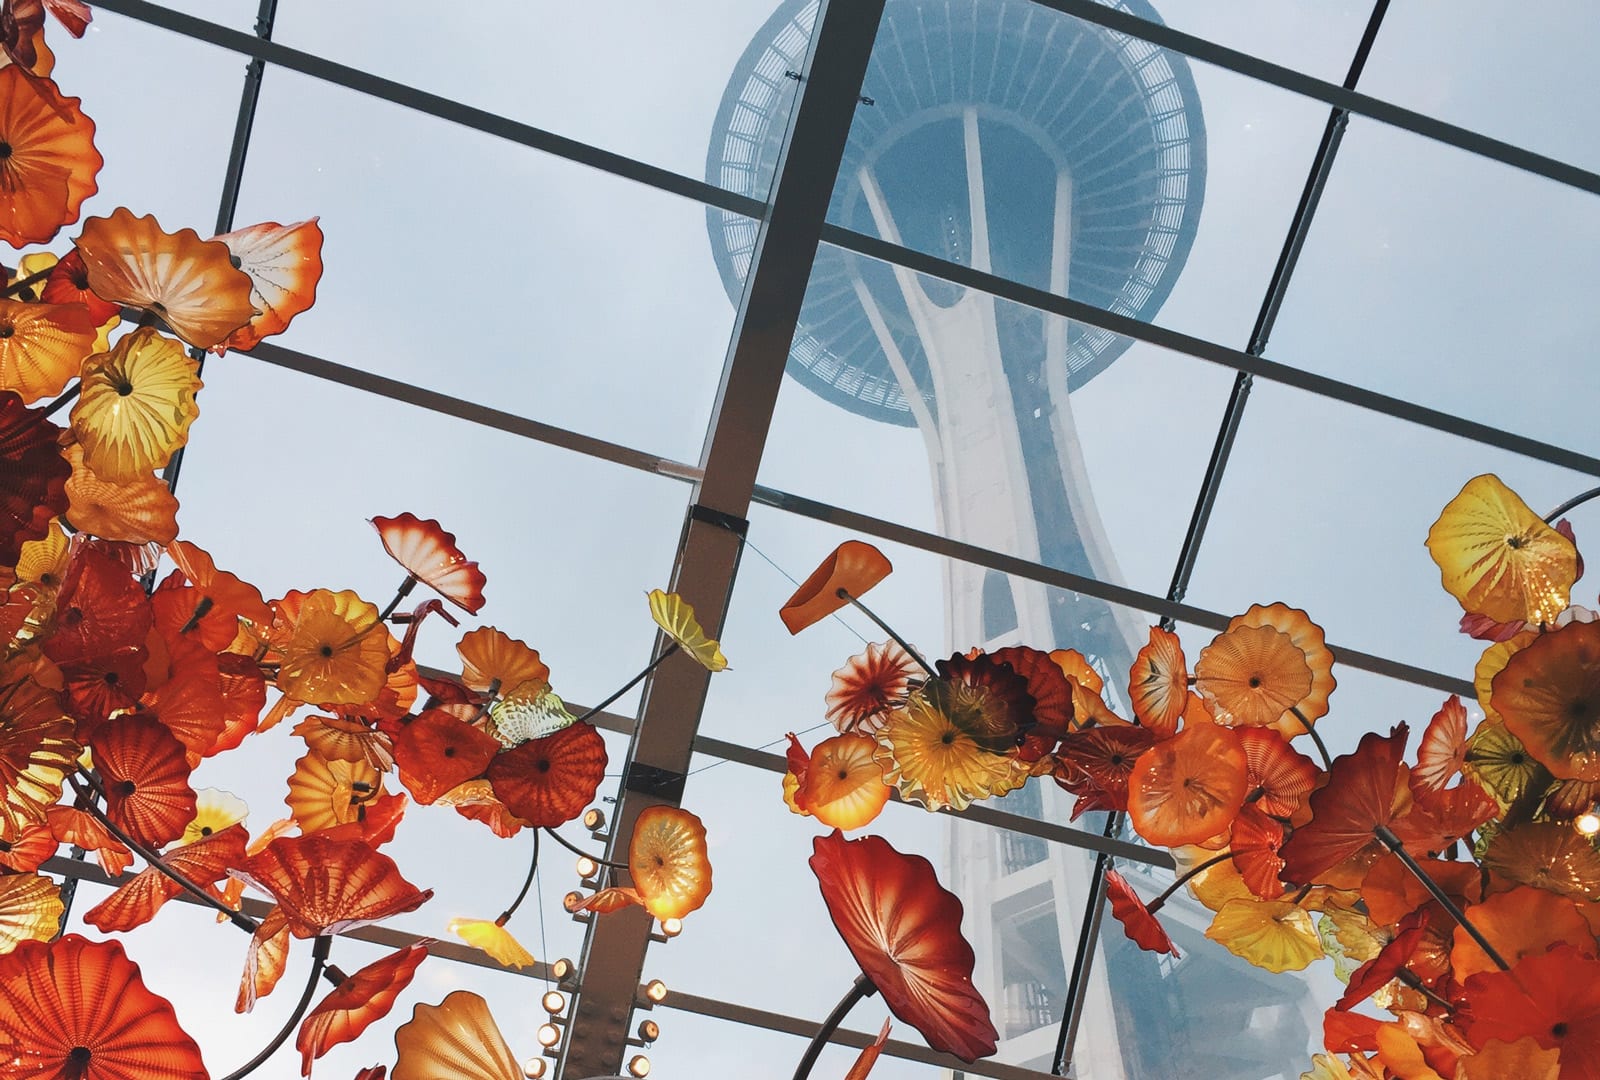 Exotic plants grow in the atrium below the space needle